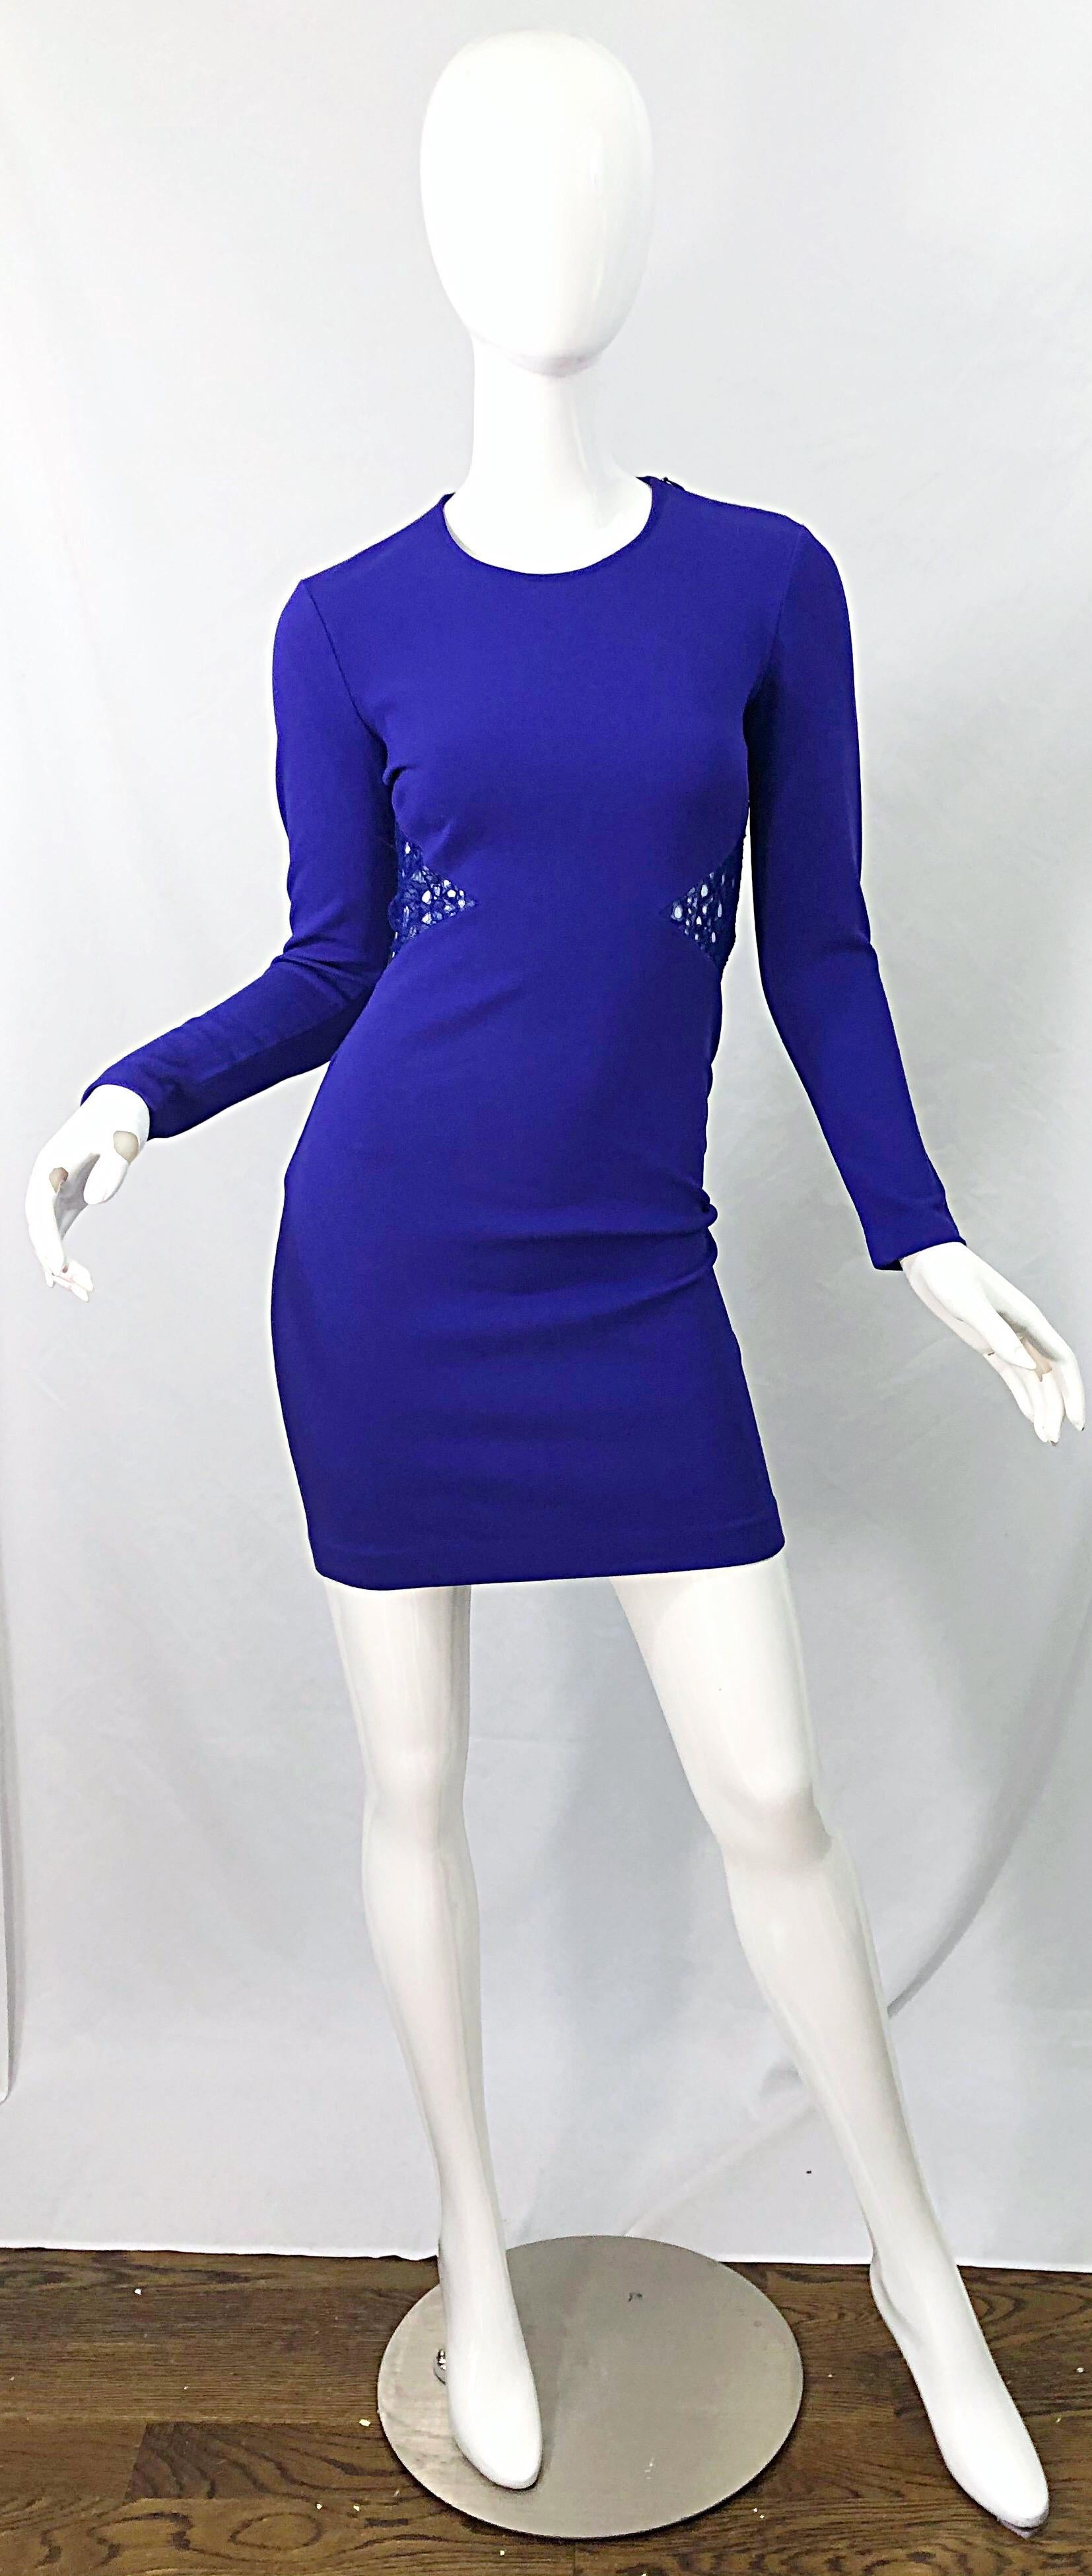 Emilio Pucci Fall 2012 Purple Rayon Lace Cut Out Long Sleeve Bodycon Dress For Sale 5